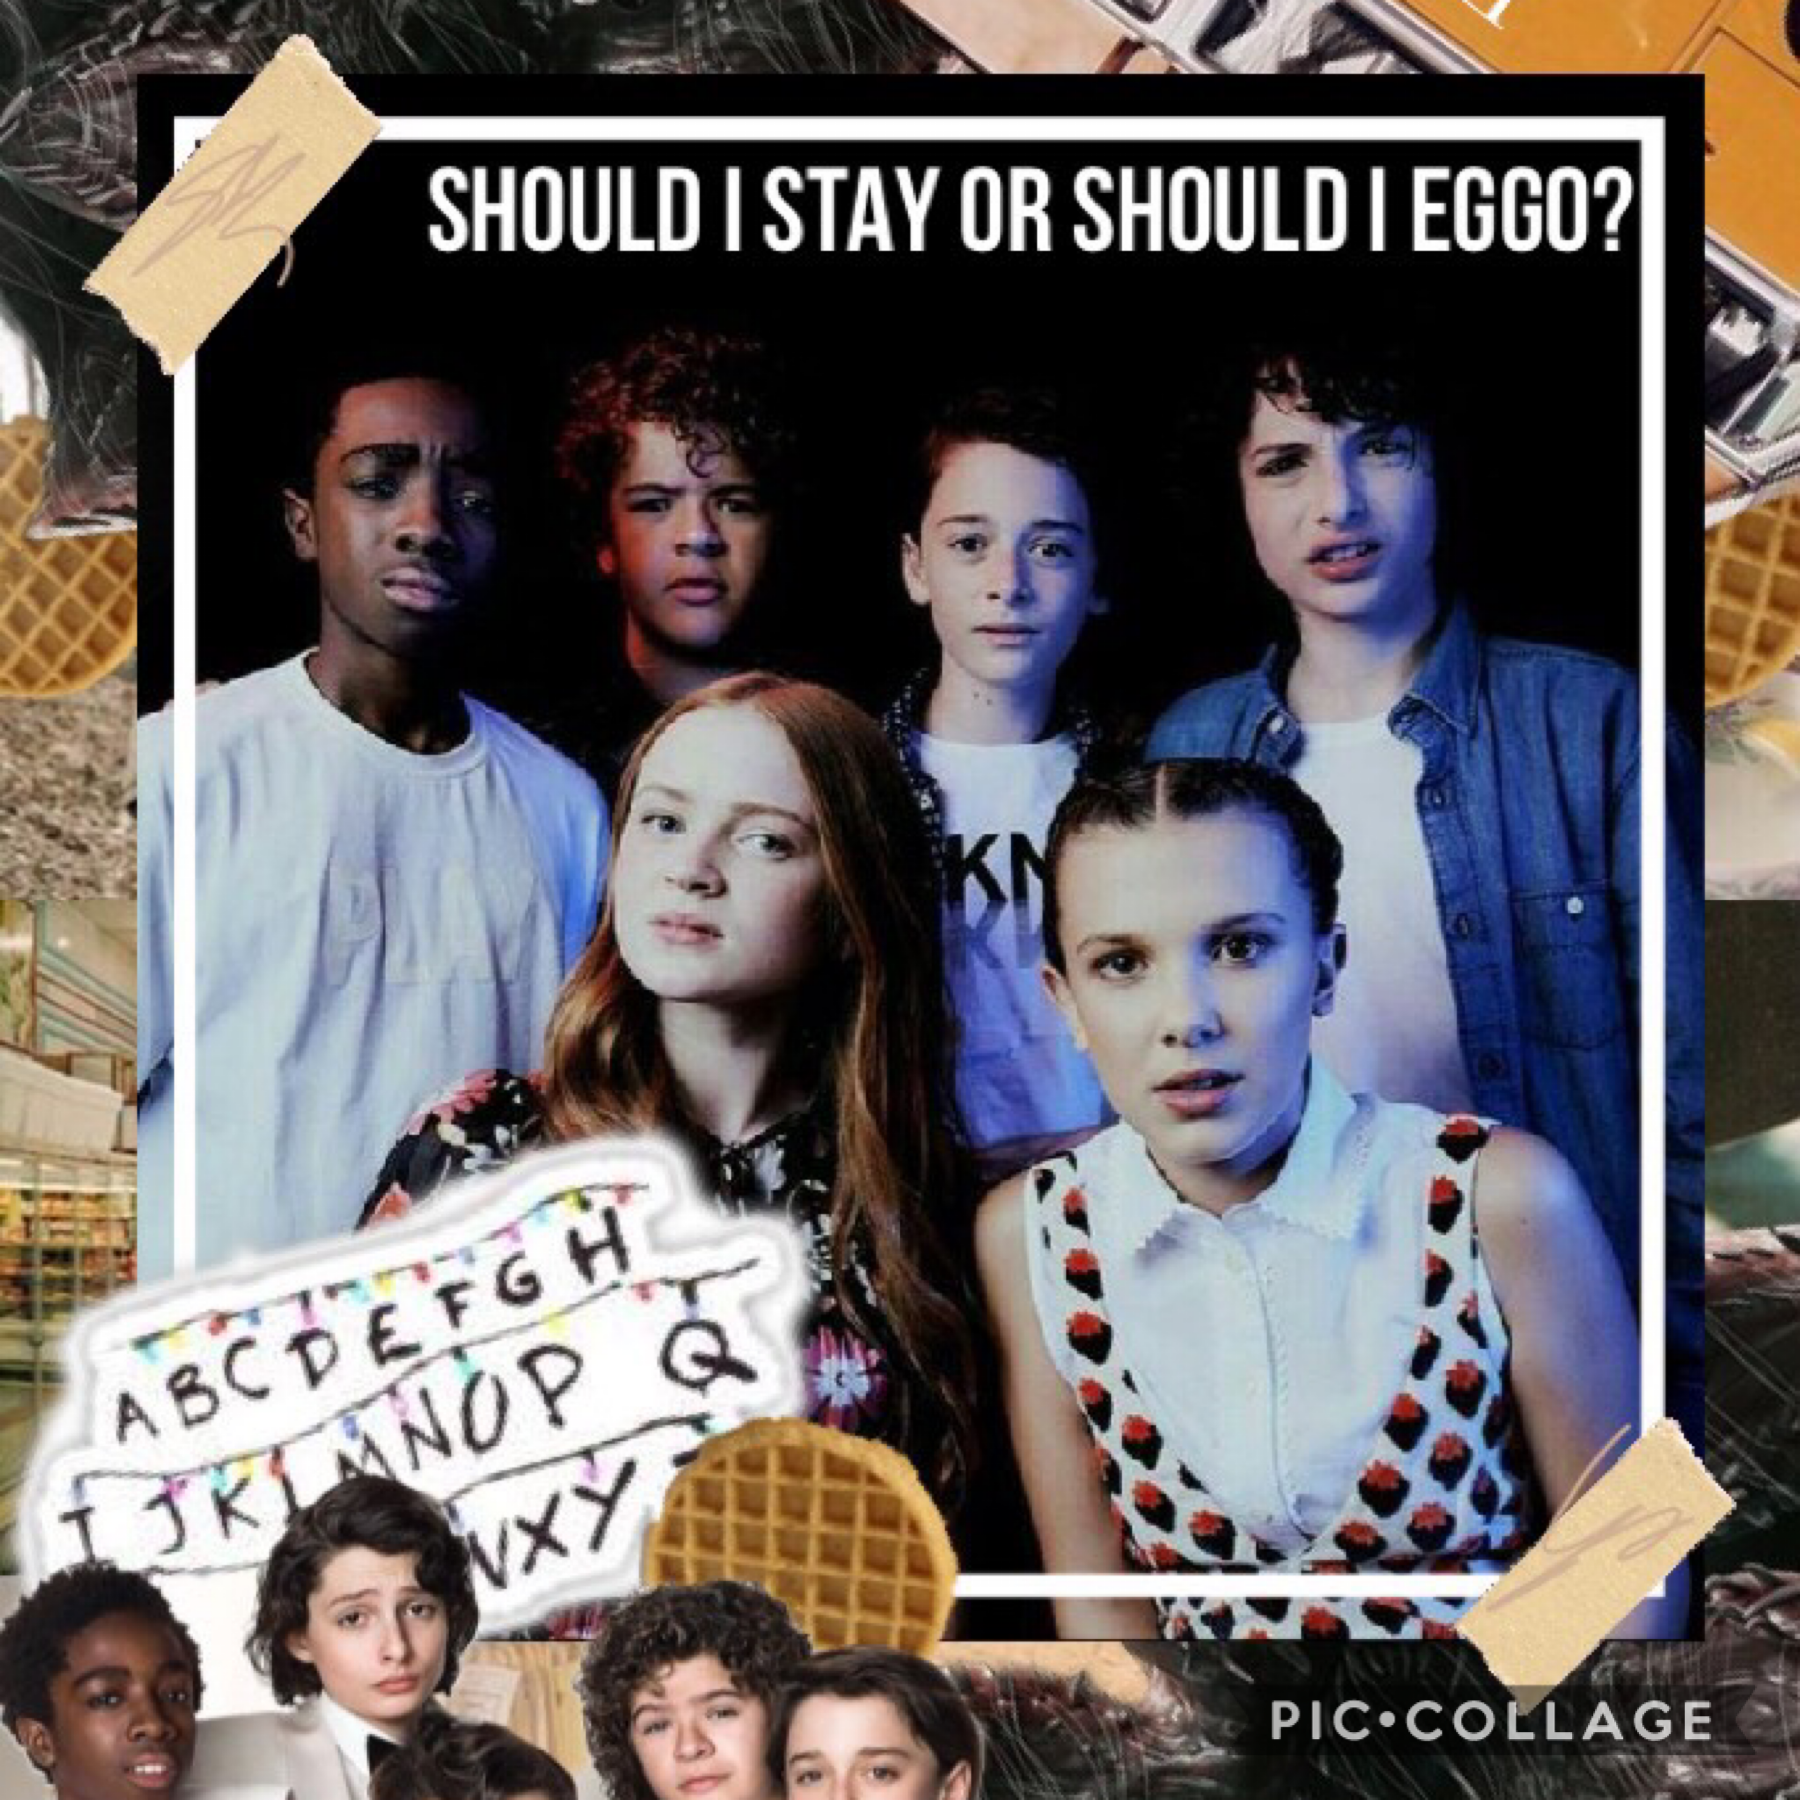 Hey guys!!! Make a collage for your favorite series or movie. Here is an example, my all time fav series is Stranger Things. Can’t wait to see what ur fav movie or series is and I also can’t wait to see ur collages 